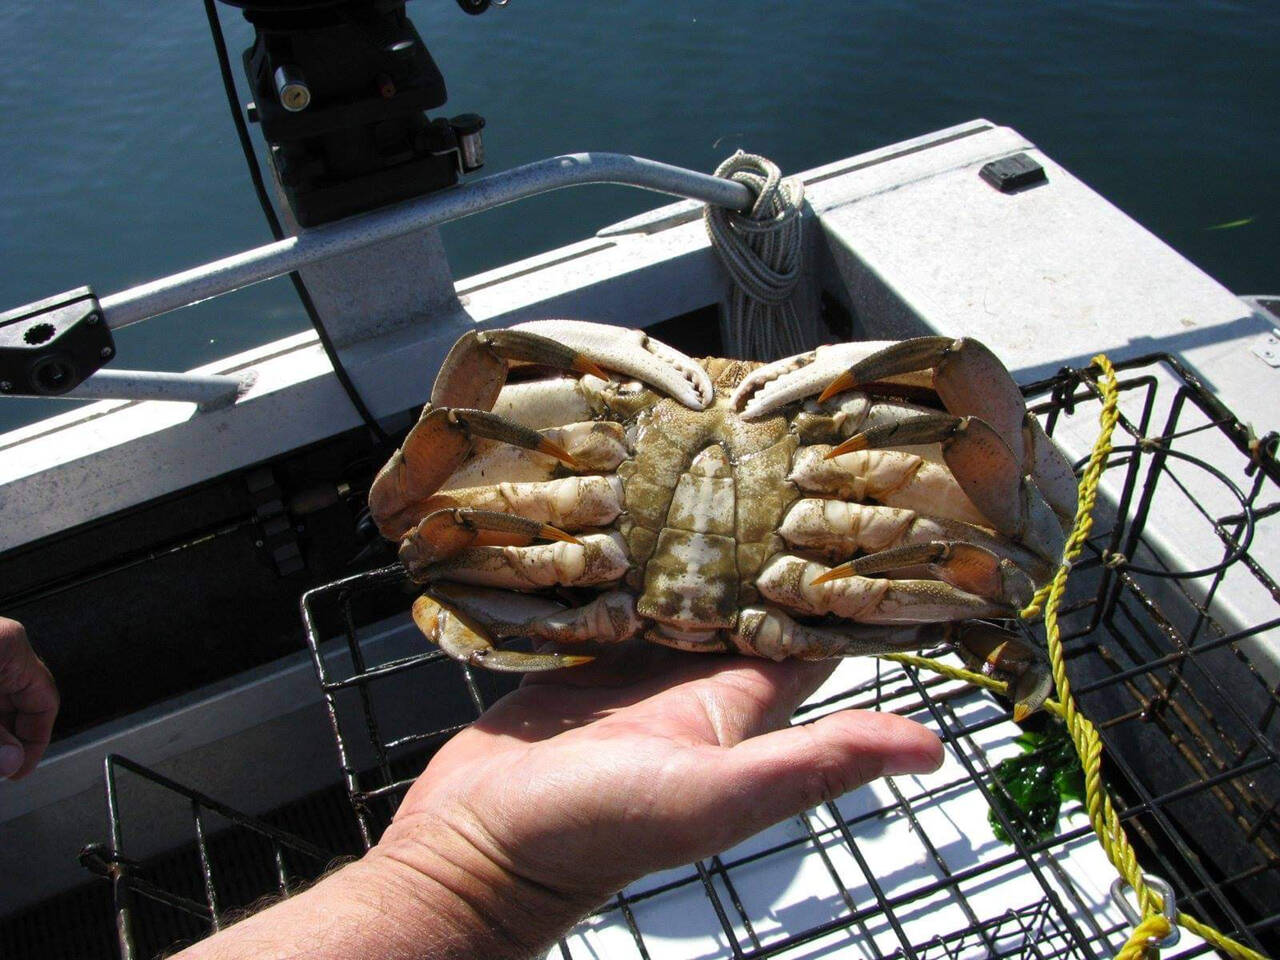 Submitted photo
Dave Croonquist, Bob Keck and Ken Townsend — members of the Puget Sound Anglers-North Olympic Peninsula Chapter, will talk about crabbing in our area waters at the club’s general meeting on Wednesday, June 15, at the Sequim Elks Lodge.